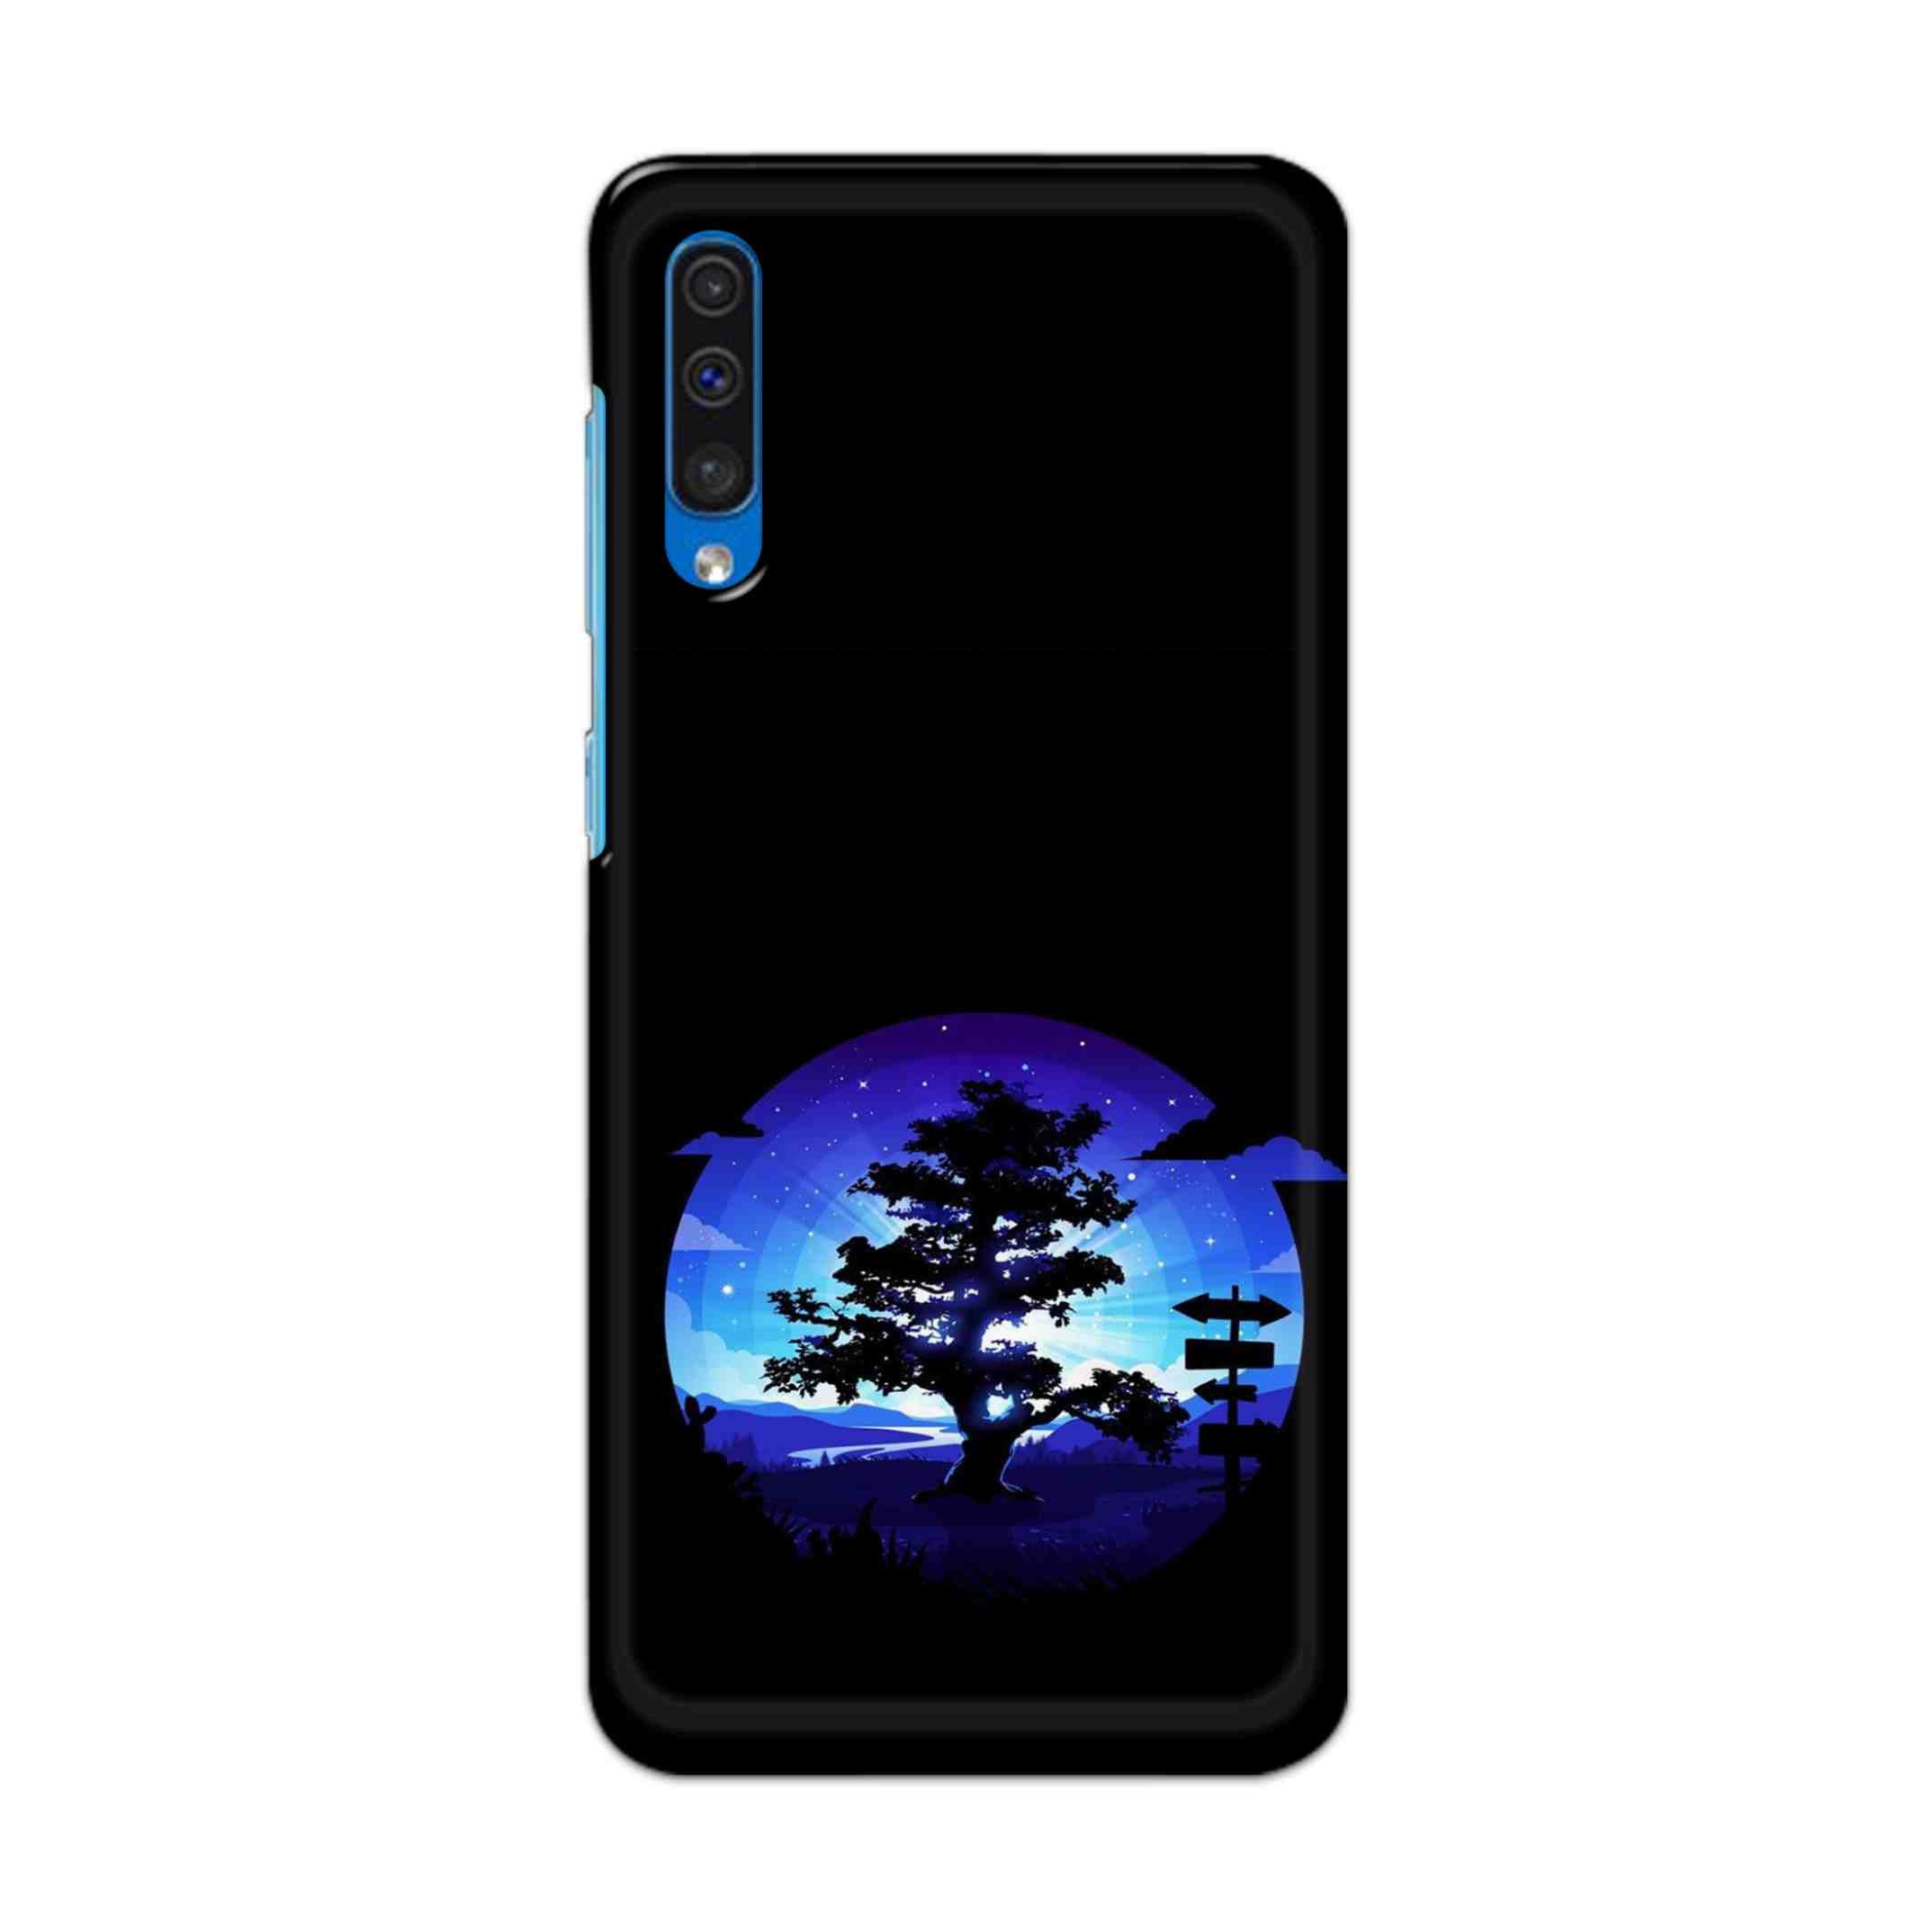 Buy Night Tree Hard Back Mobile Phone Case Cover For Samsung Galaxy A50 / A50s / A30s Online